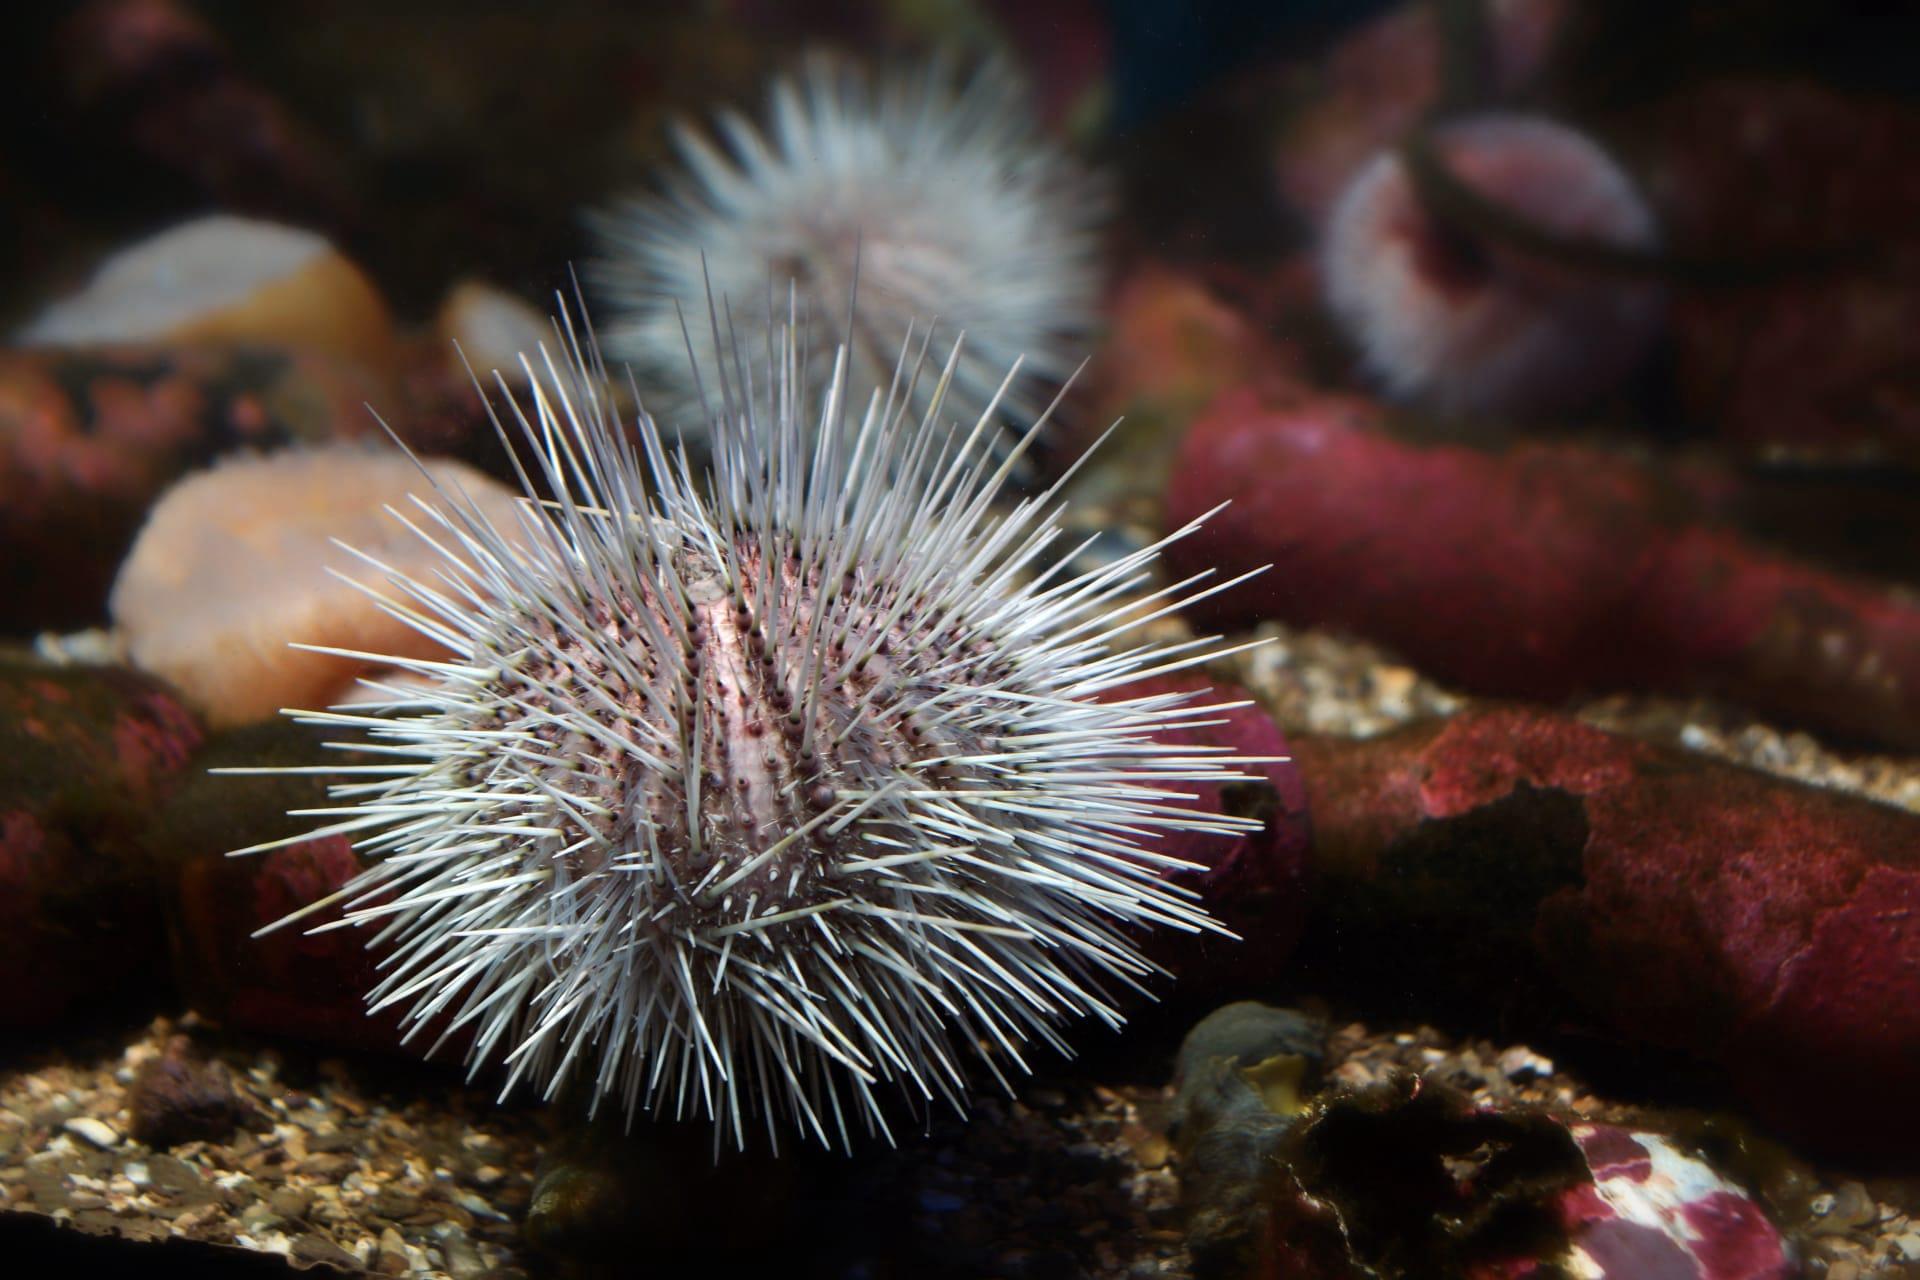 Sea urchin pictures